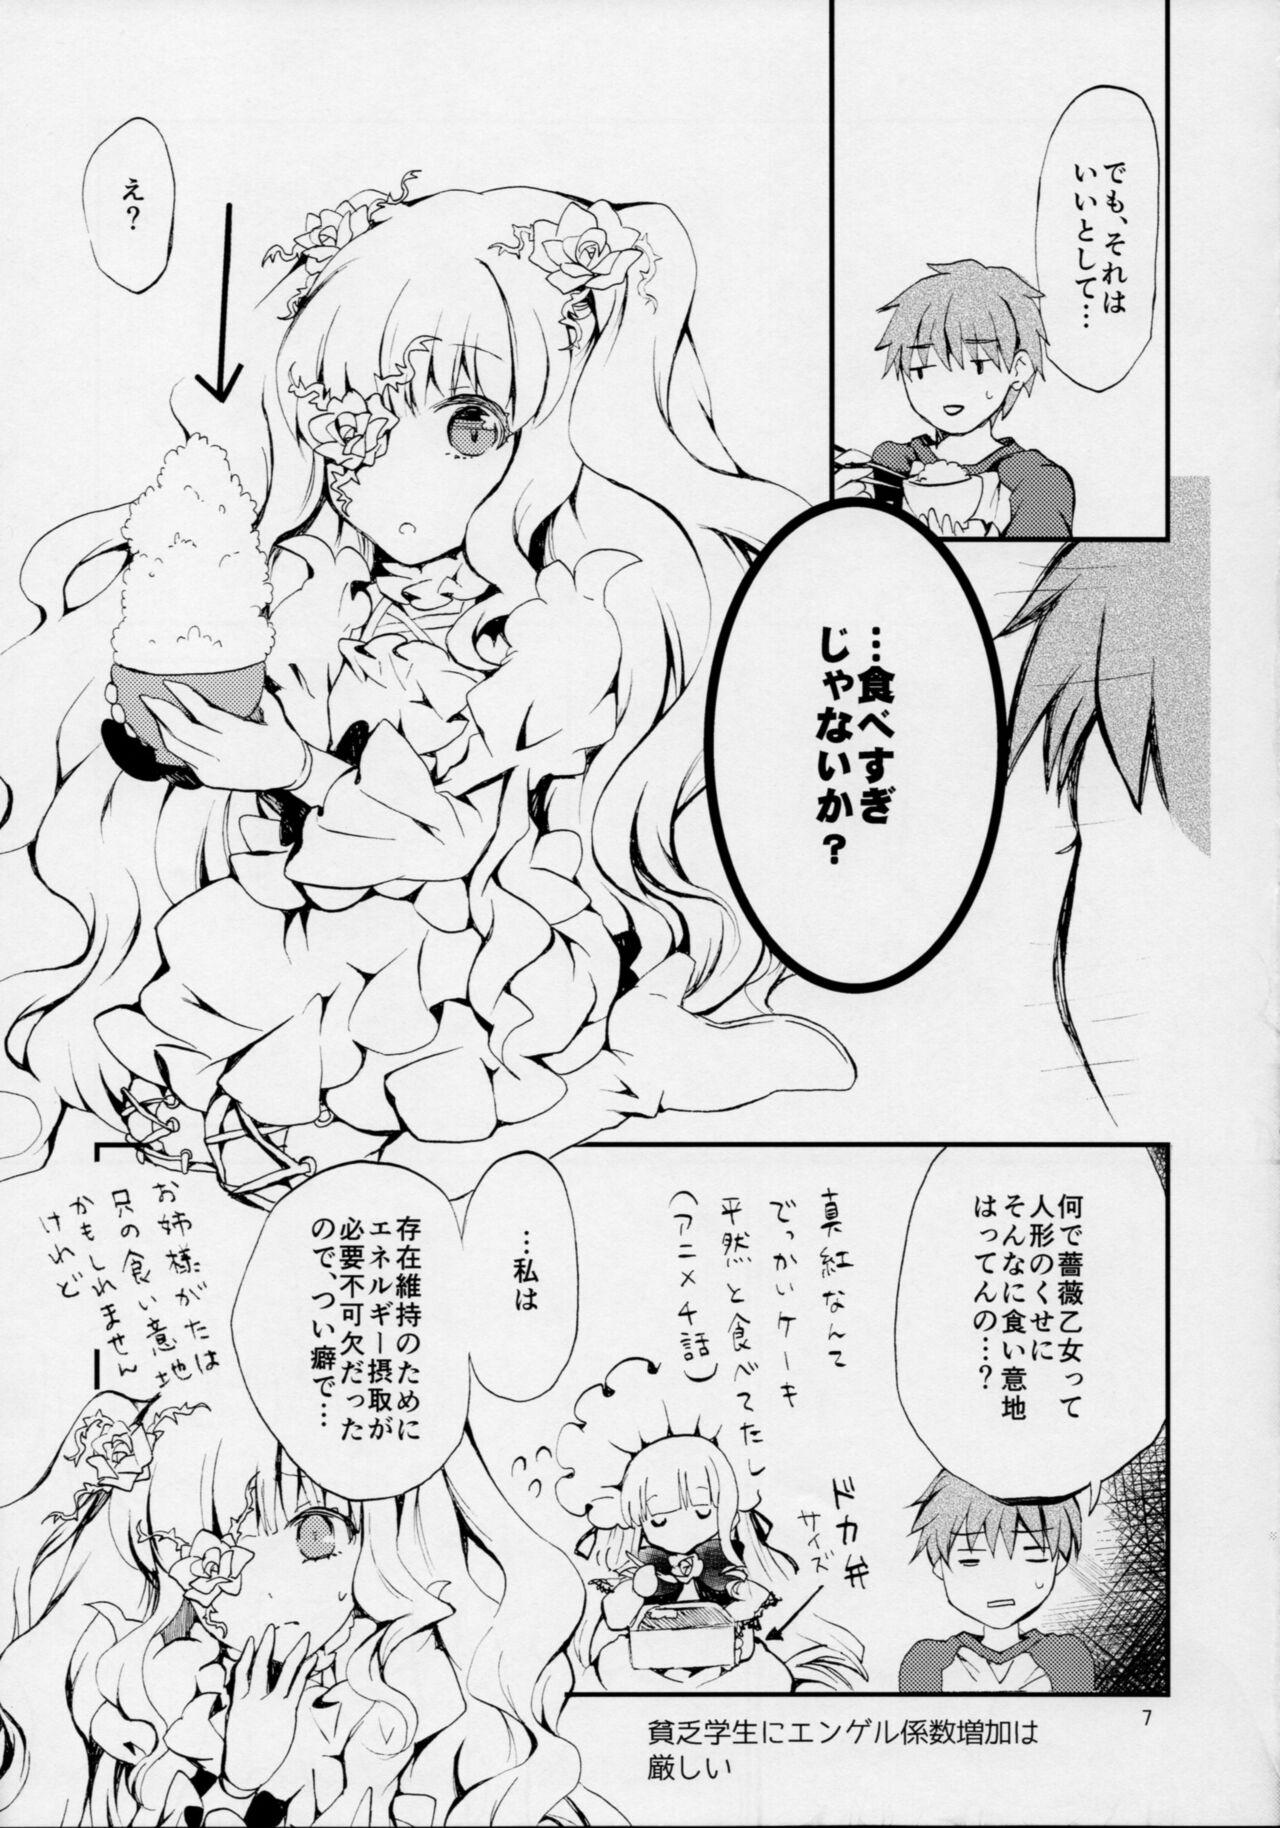 Free 18 Year Old Porn Eat me, Drink me - Rozen maiden Bigboobs - Page 4